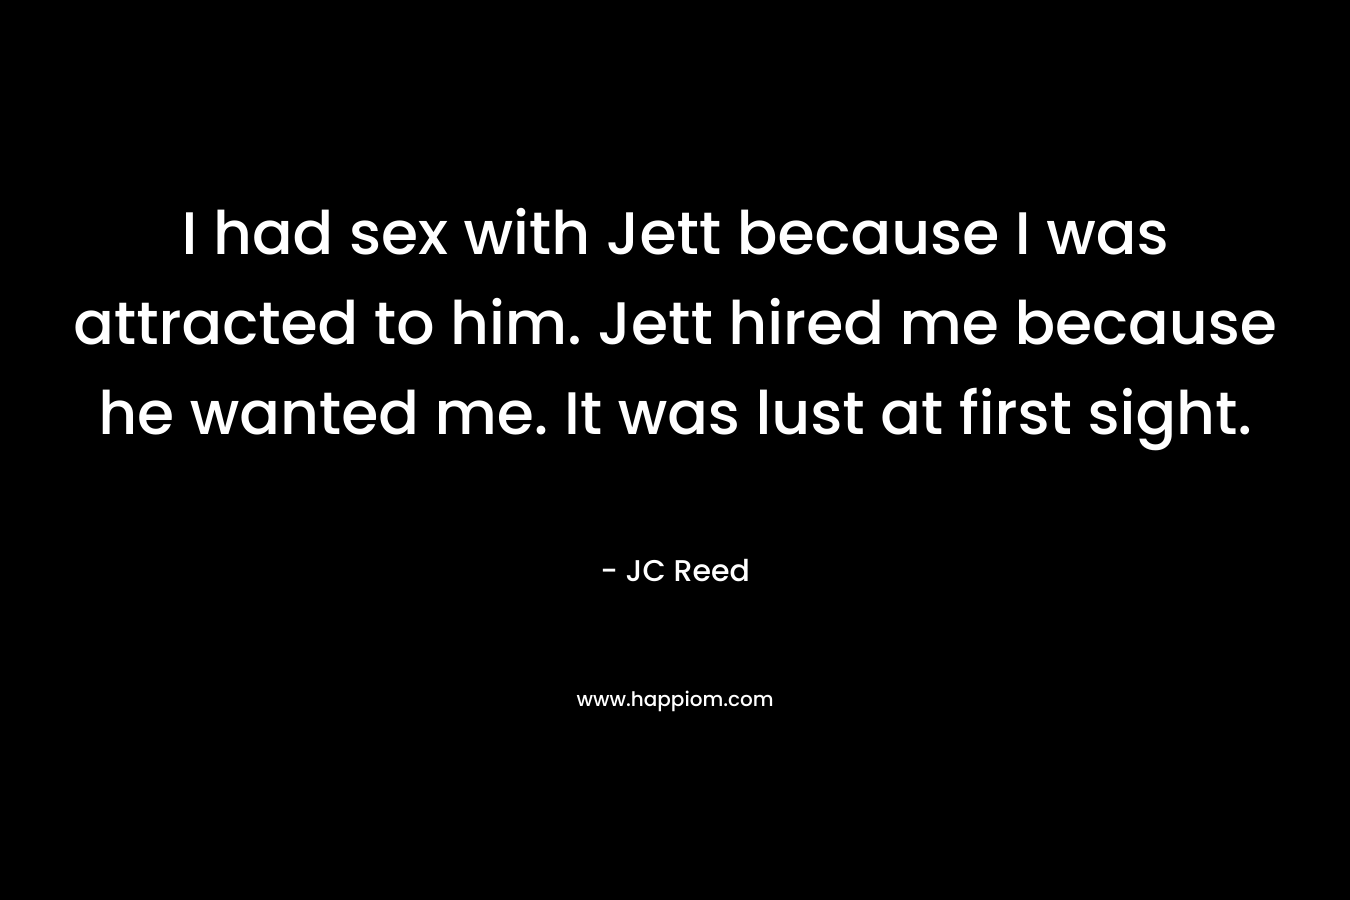 I had sex with Jett because I was attracted to him. Jett hired me because he wanted me. It was lust at first sight. – JC Reed